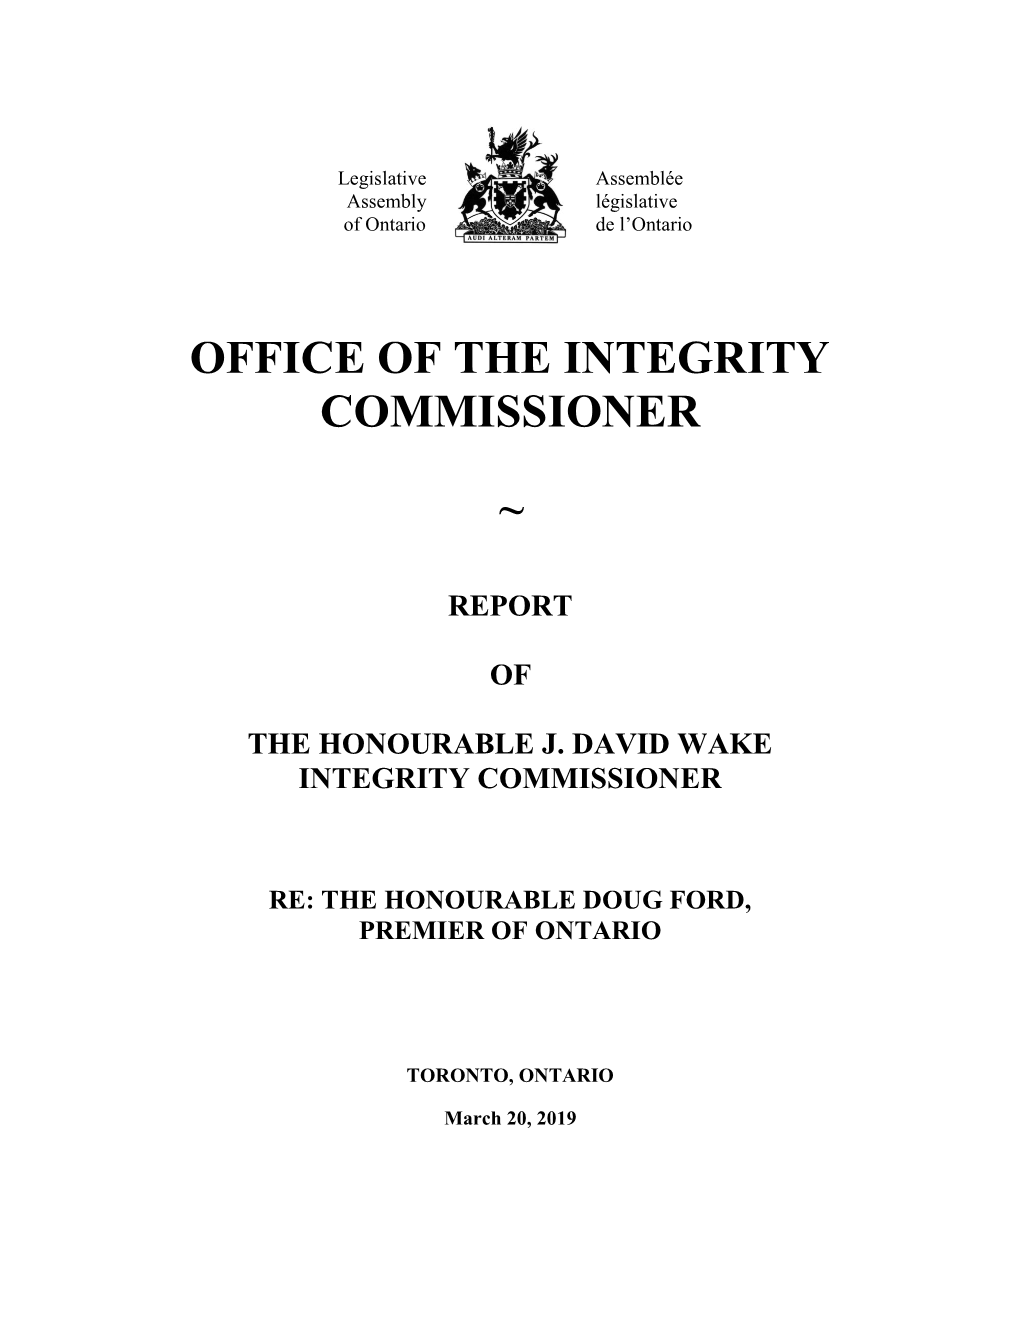 Integrity Commissioner's Report